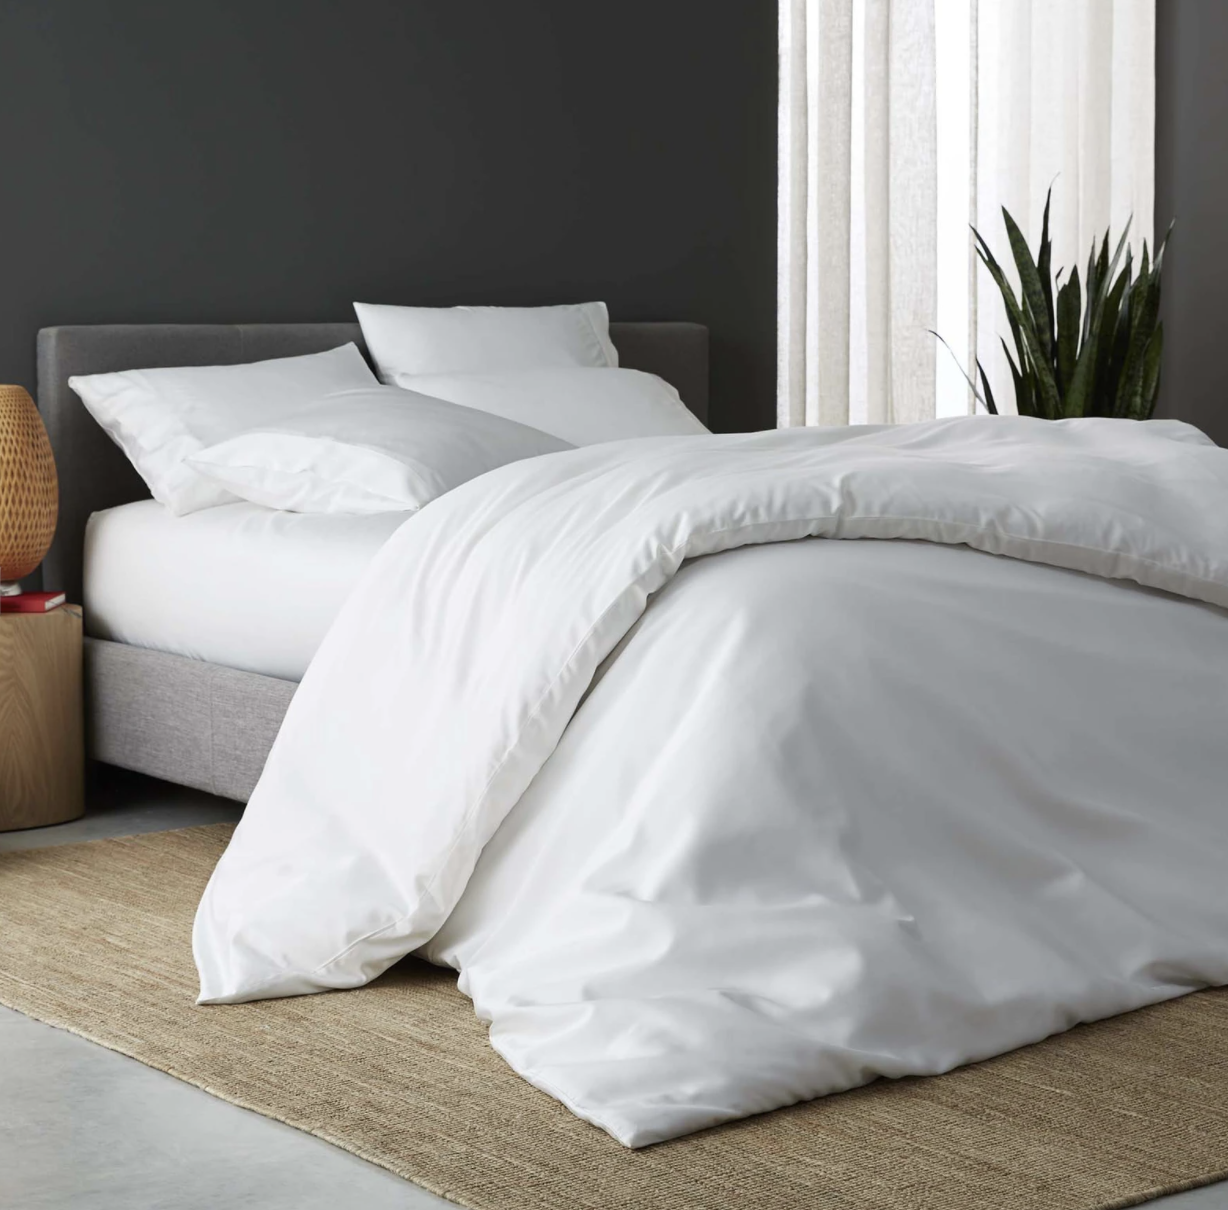 Bed with white Sijo duvet cover and sheet set